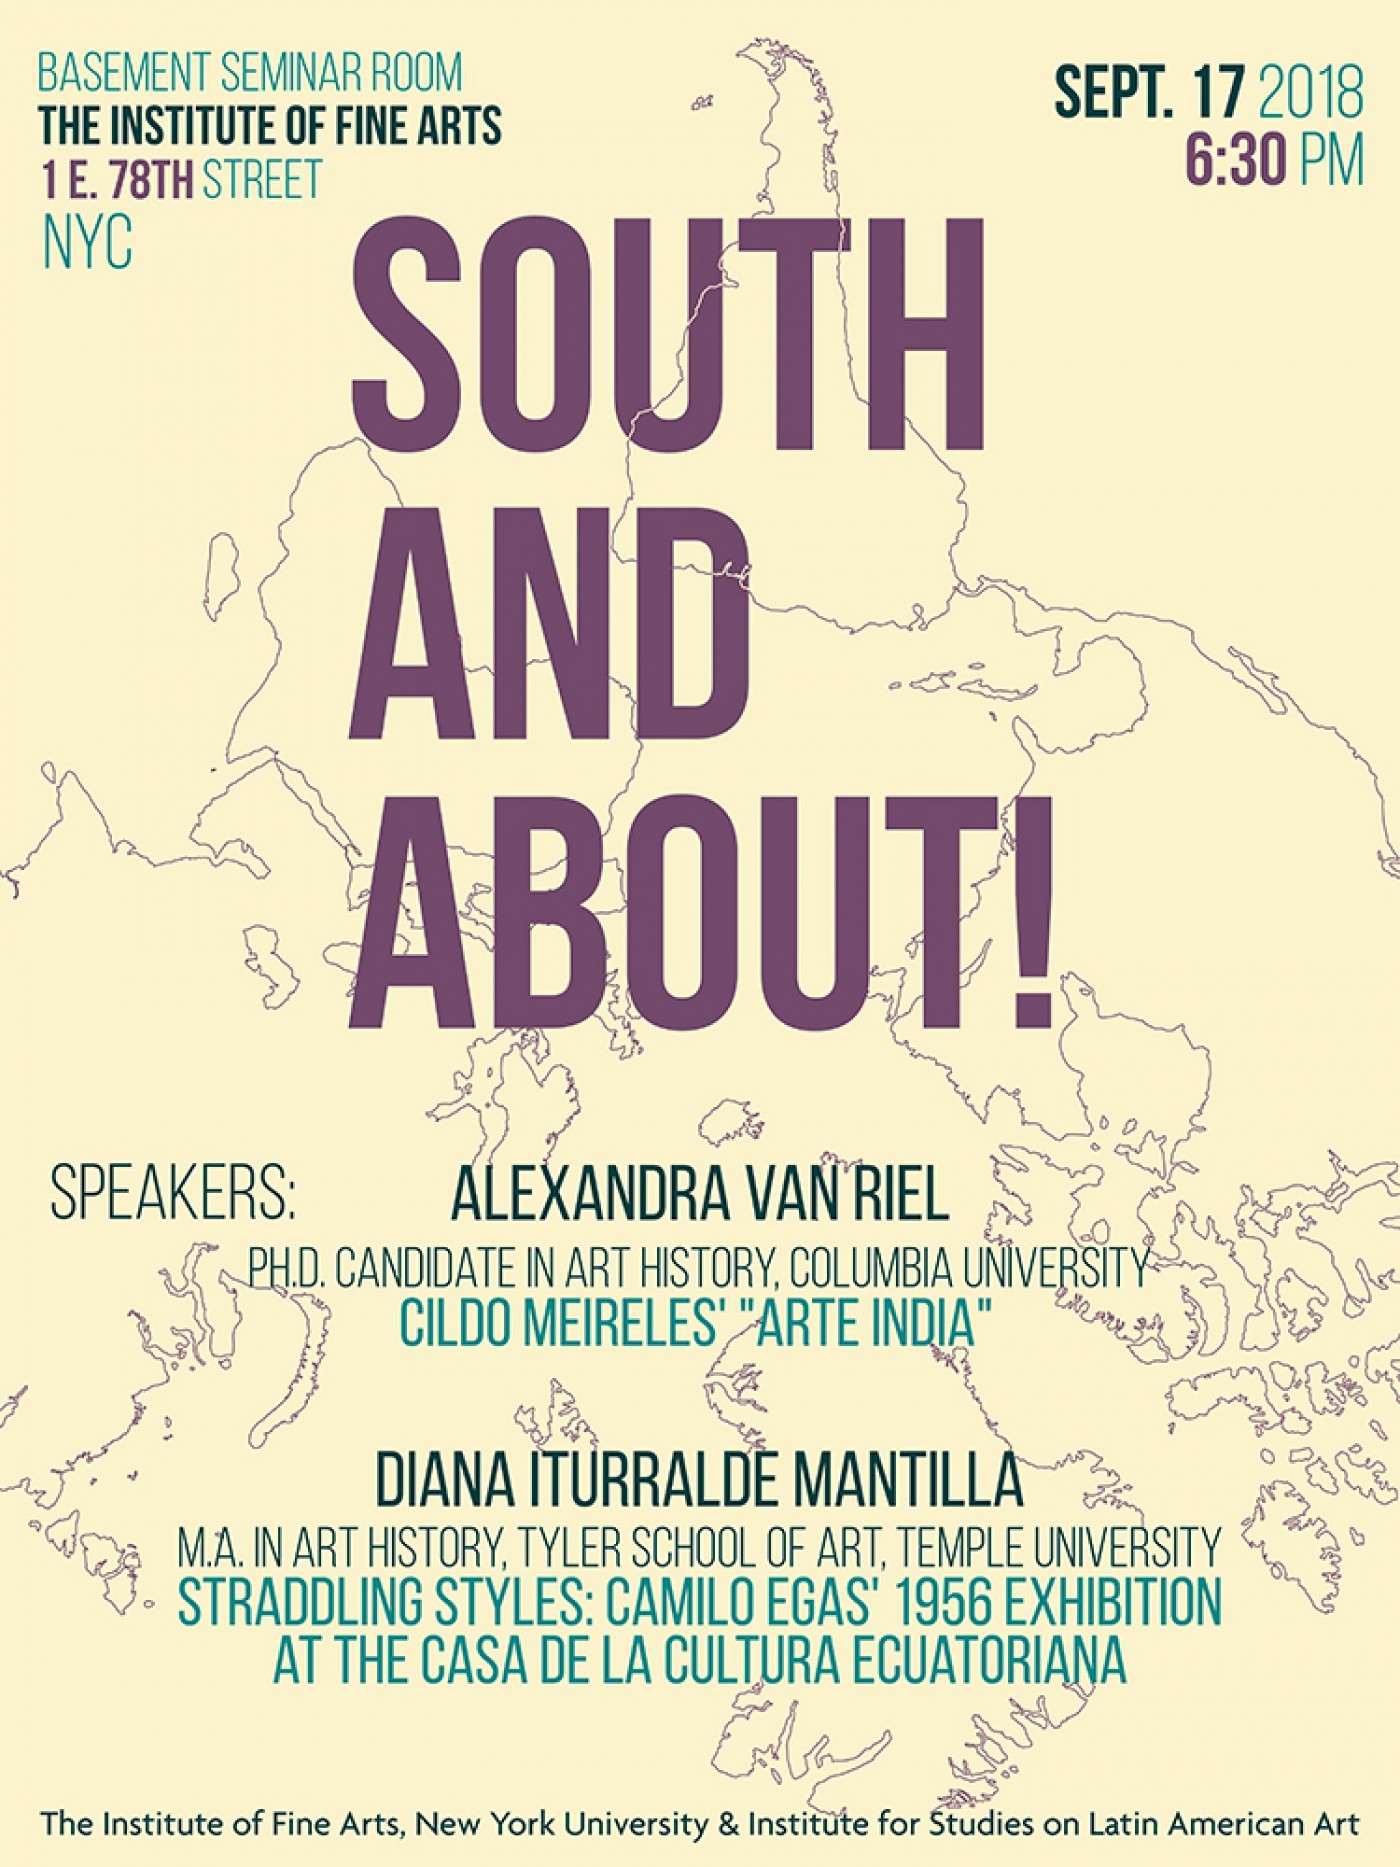 South and About event poster, Alexandra van Riel and Diana Iturralde Mantilla, September 17, 2018